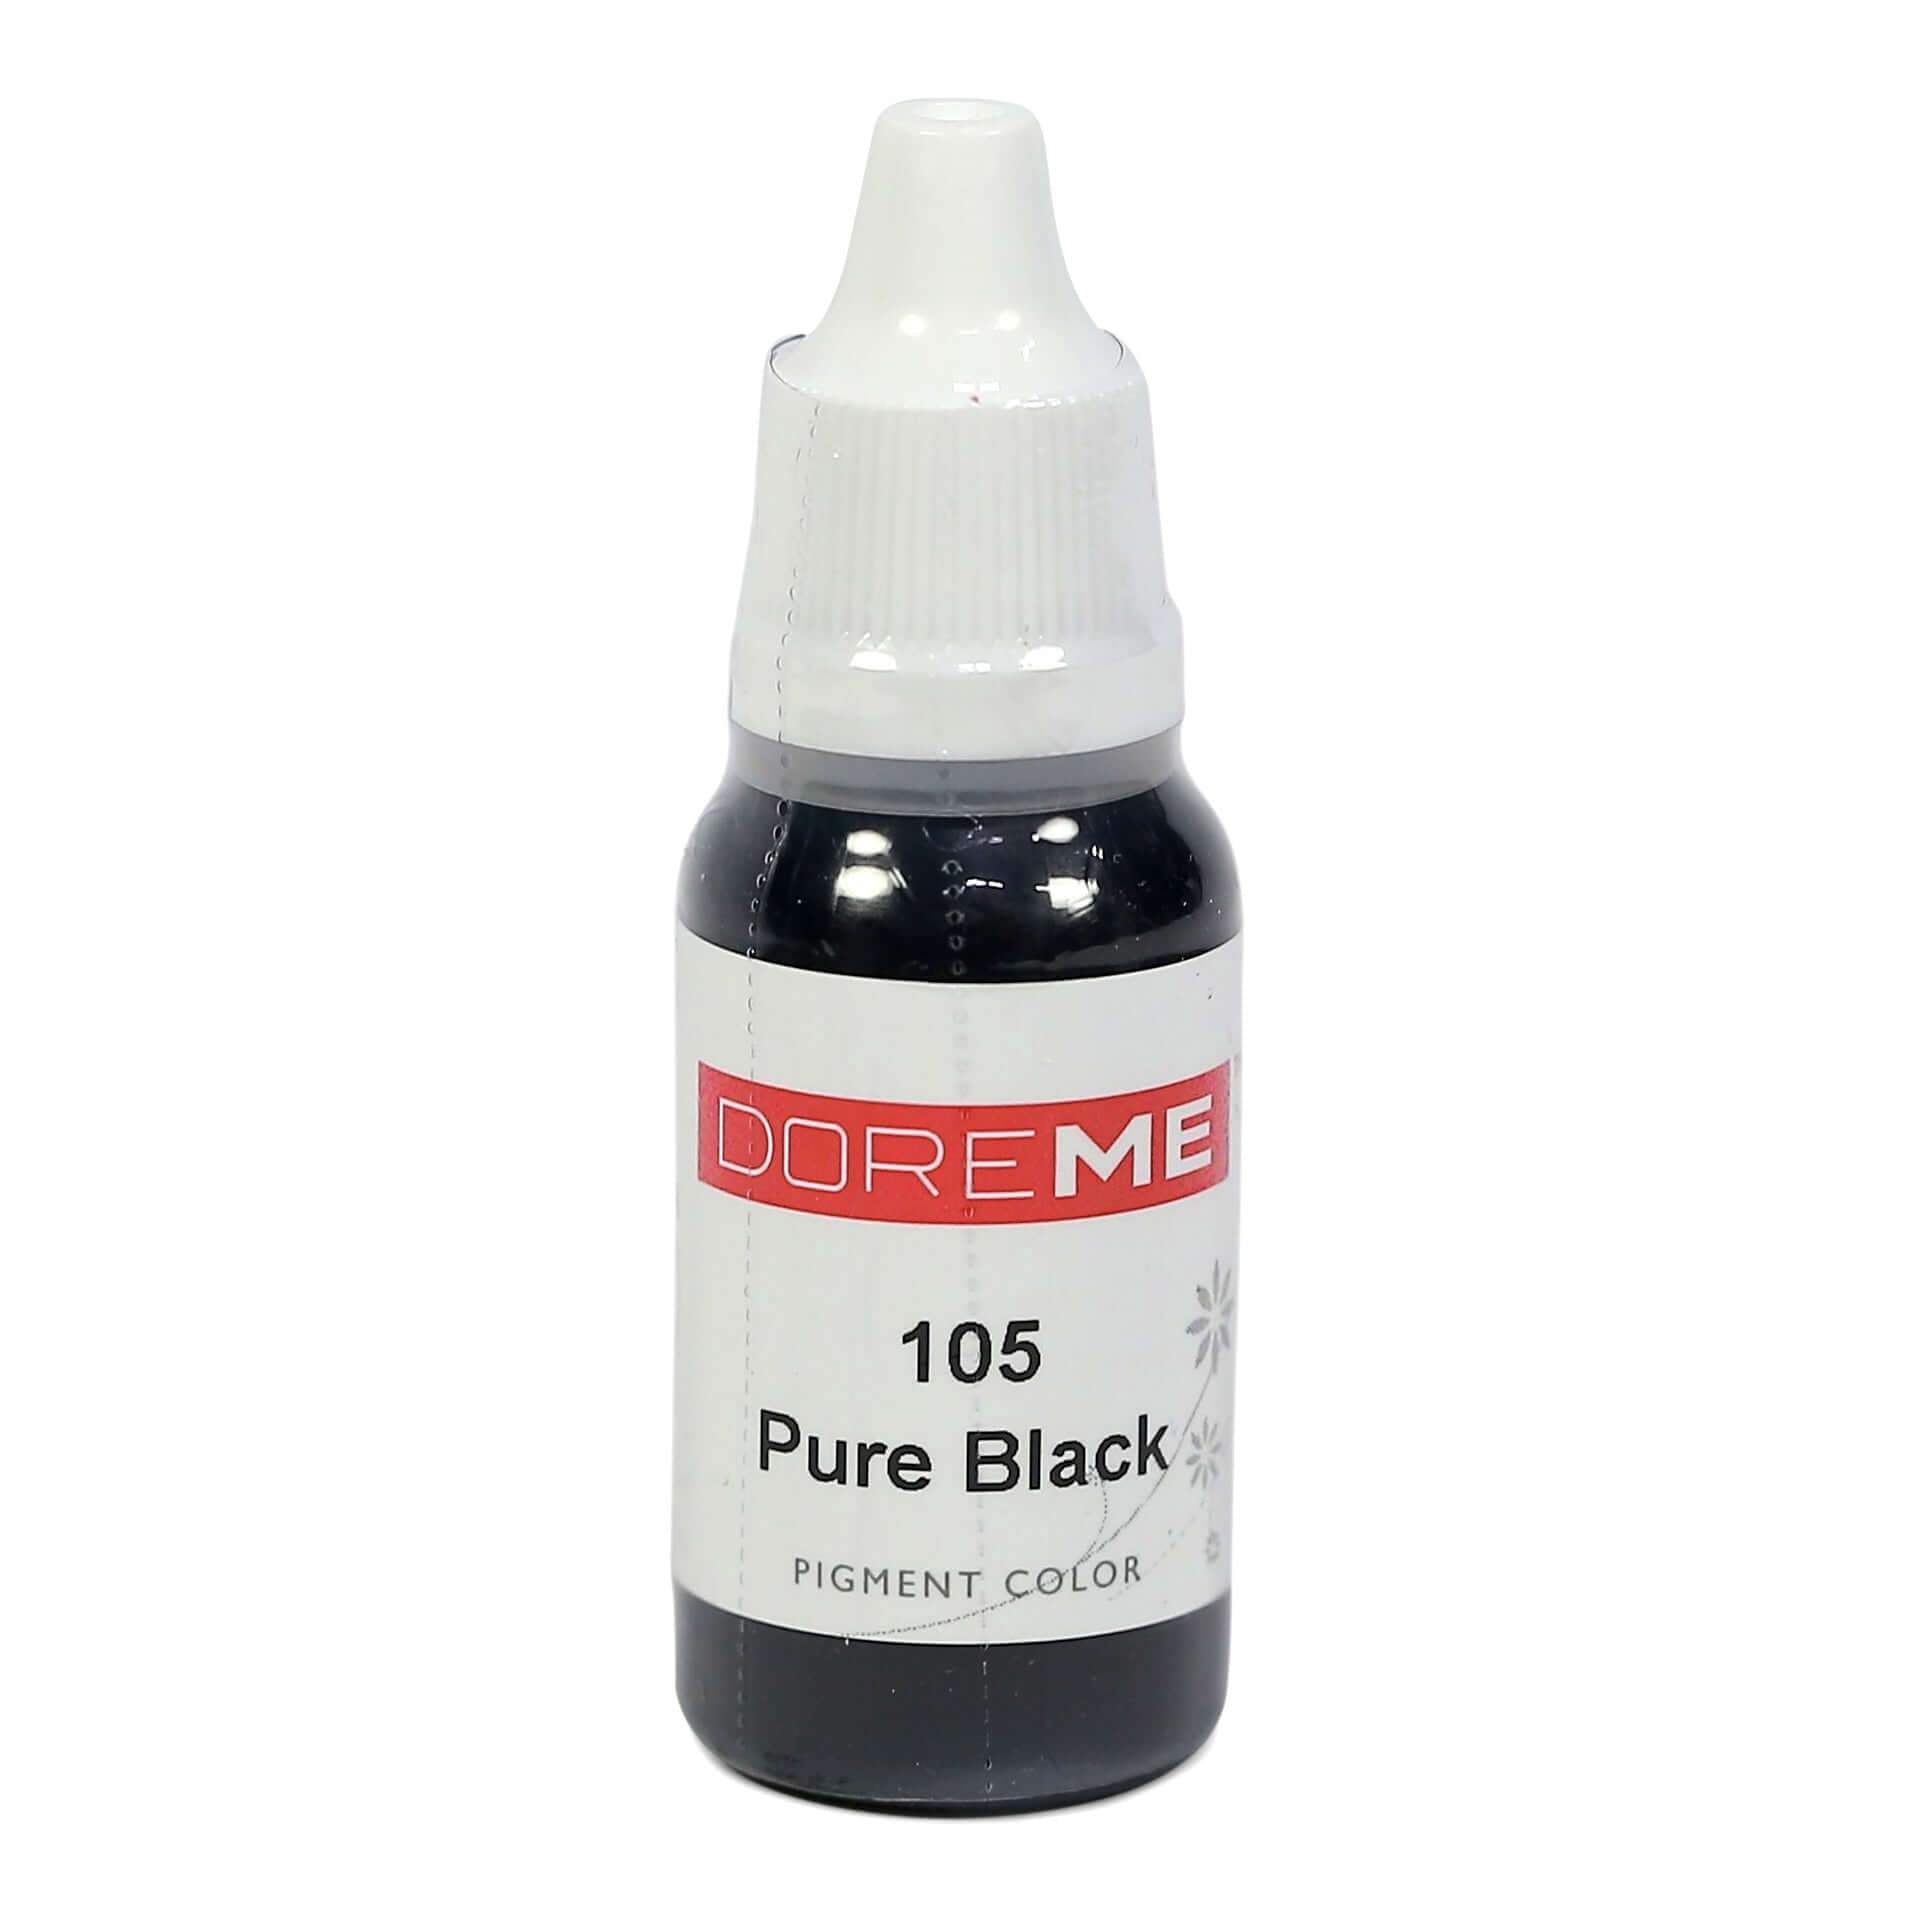 Permanent Makeup pigments Doreme Micropigmentation Eyebrow, Eyeliner, Lip Colours 105 Pure Black (c) - Beautiful Ink UK trade and wholesale supplier